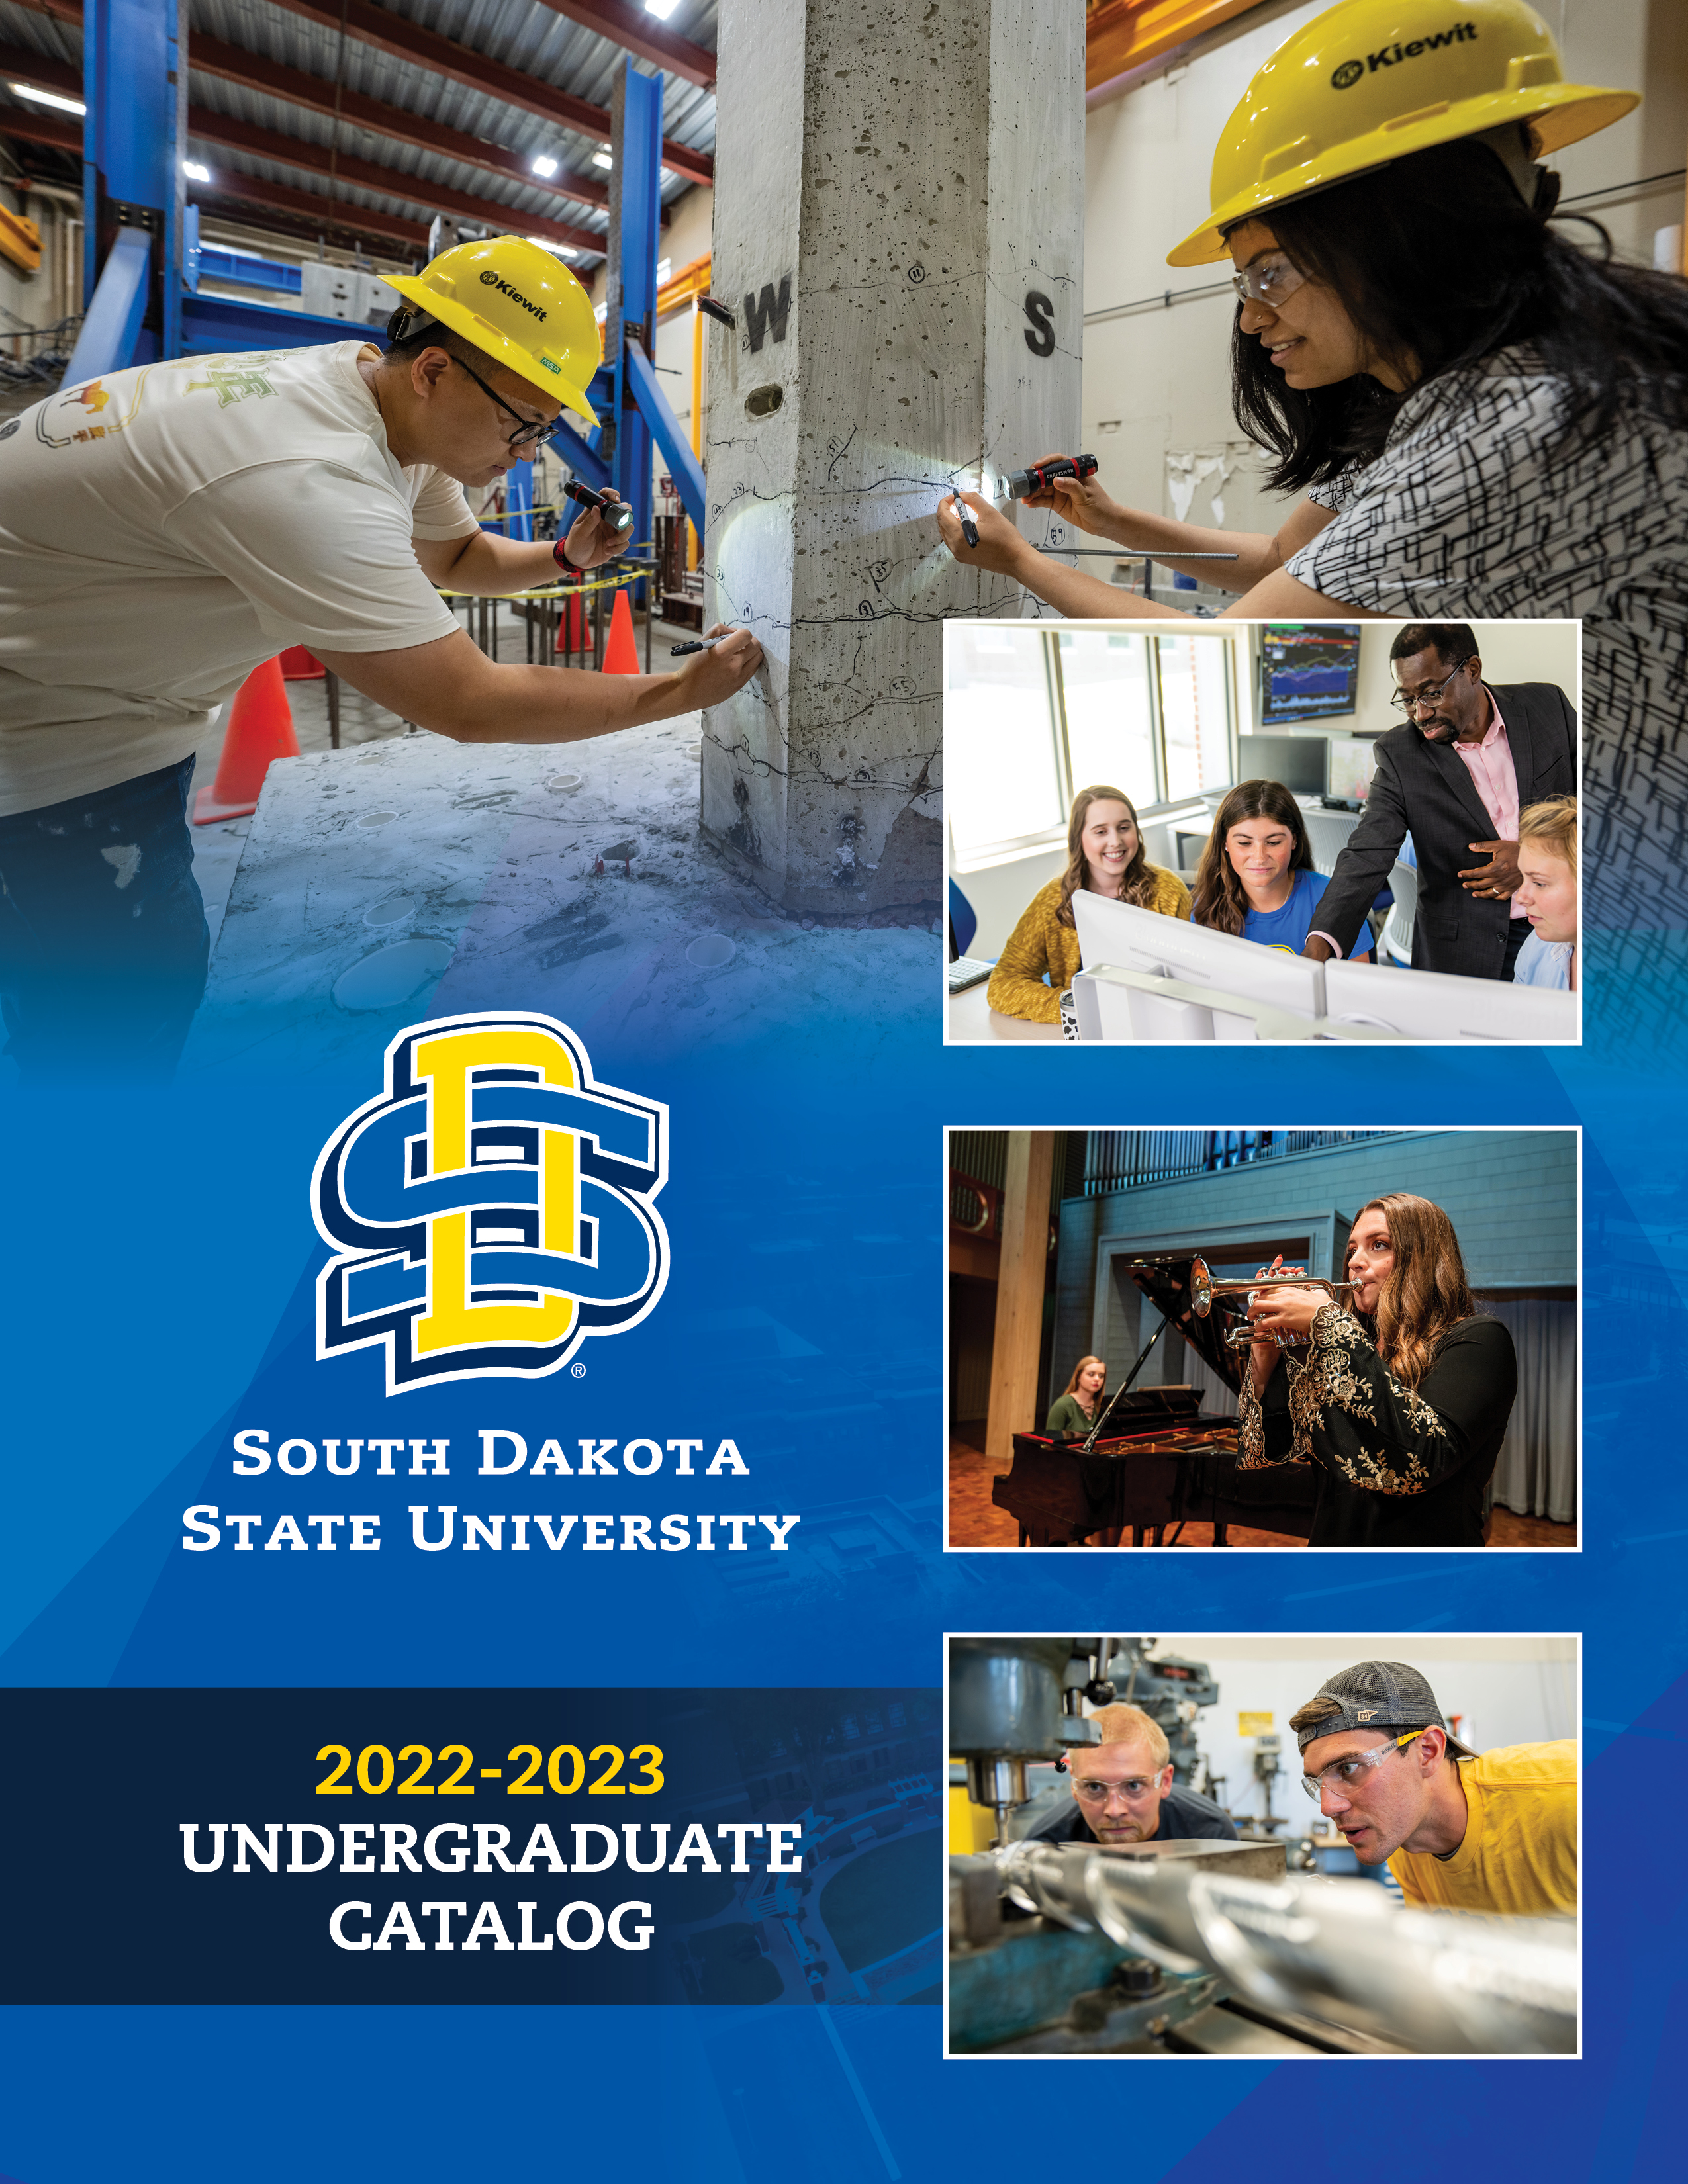 2022-2023 Undergraduate Catalog Cover - various views of students and faculty across campus in classrooms.